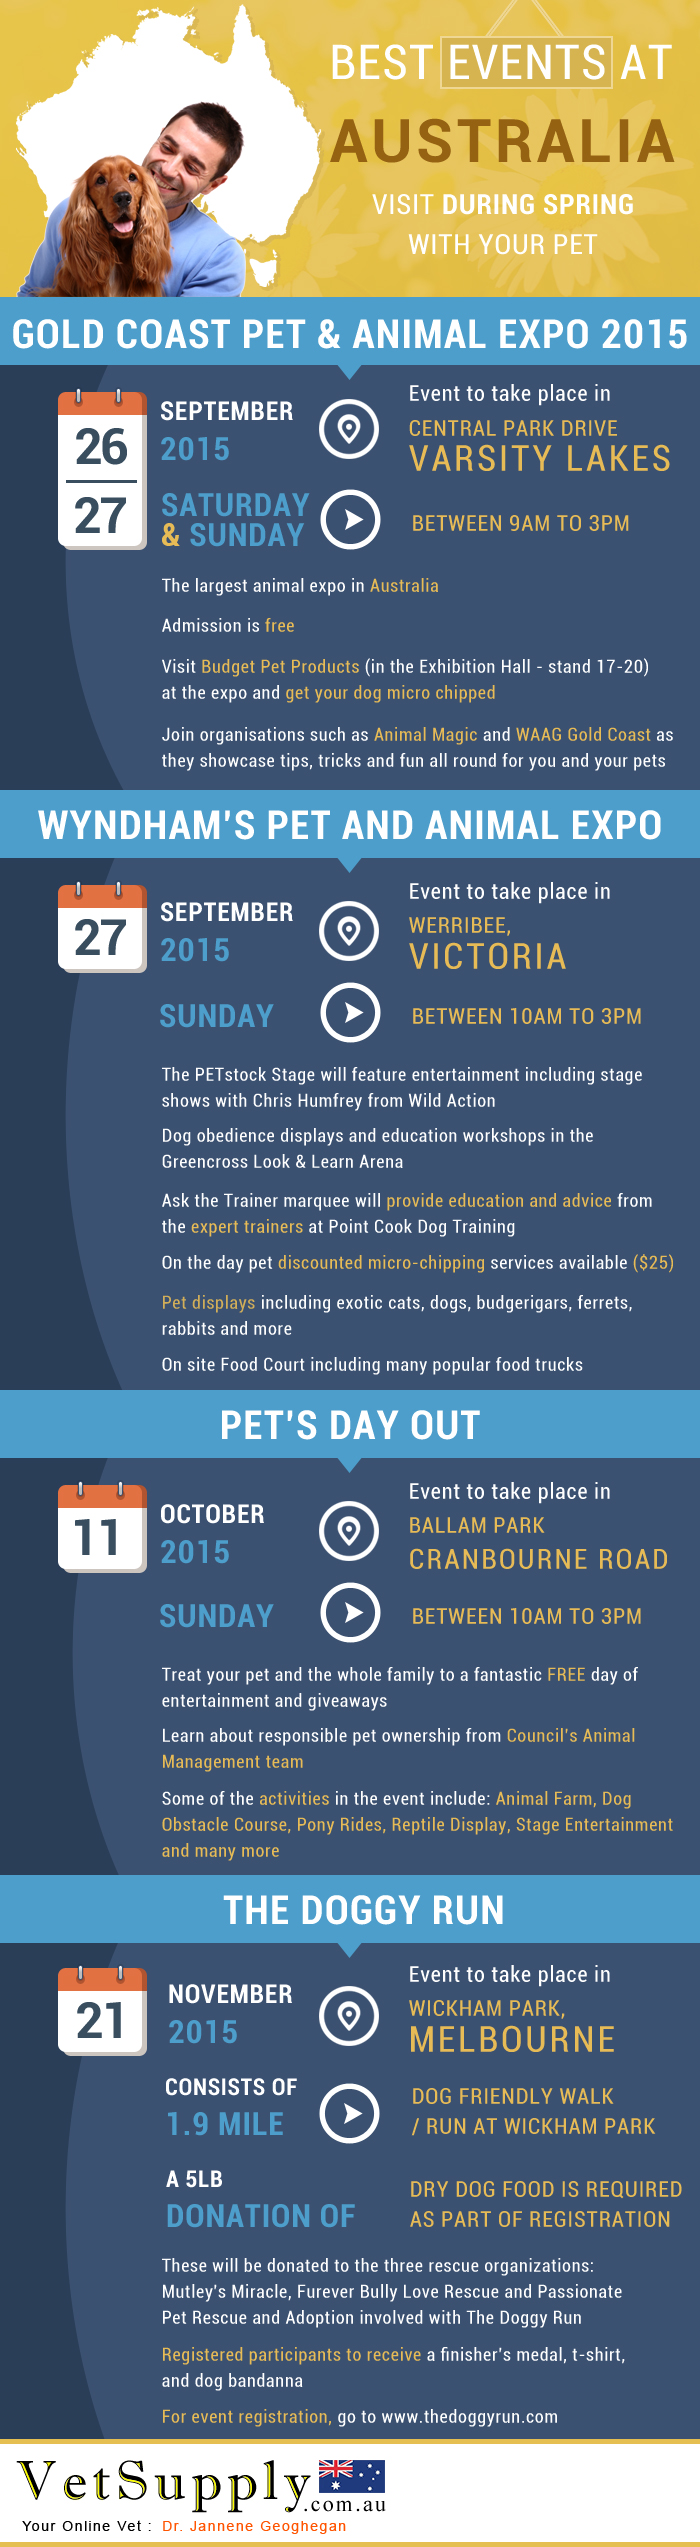 Best Events to visit during spring in Australia with your pet